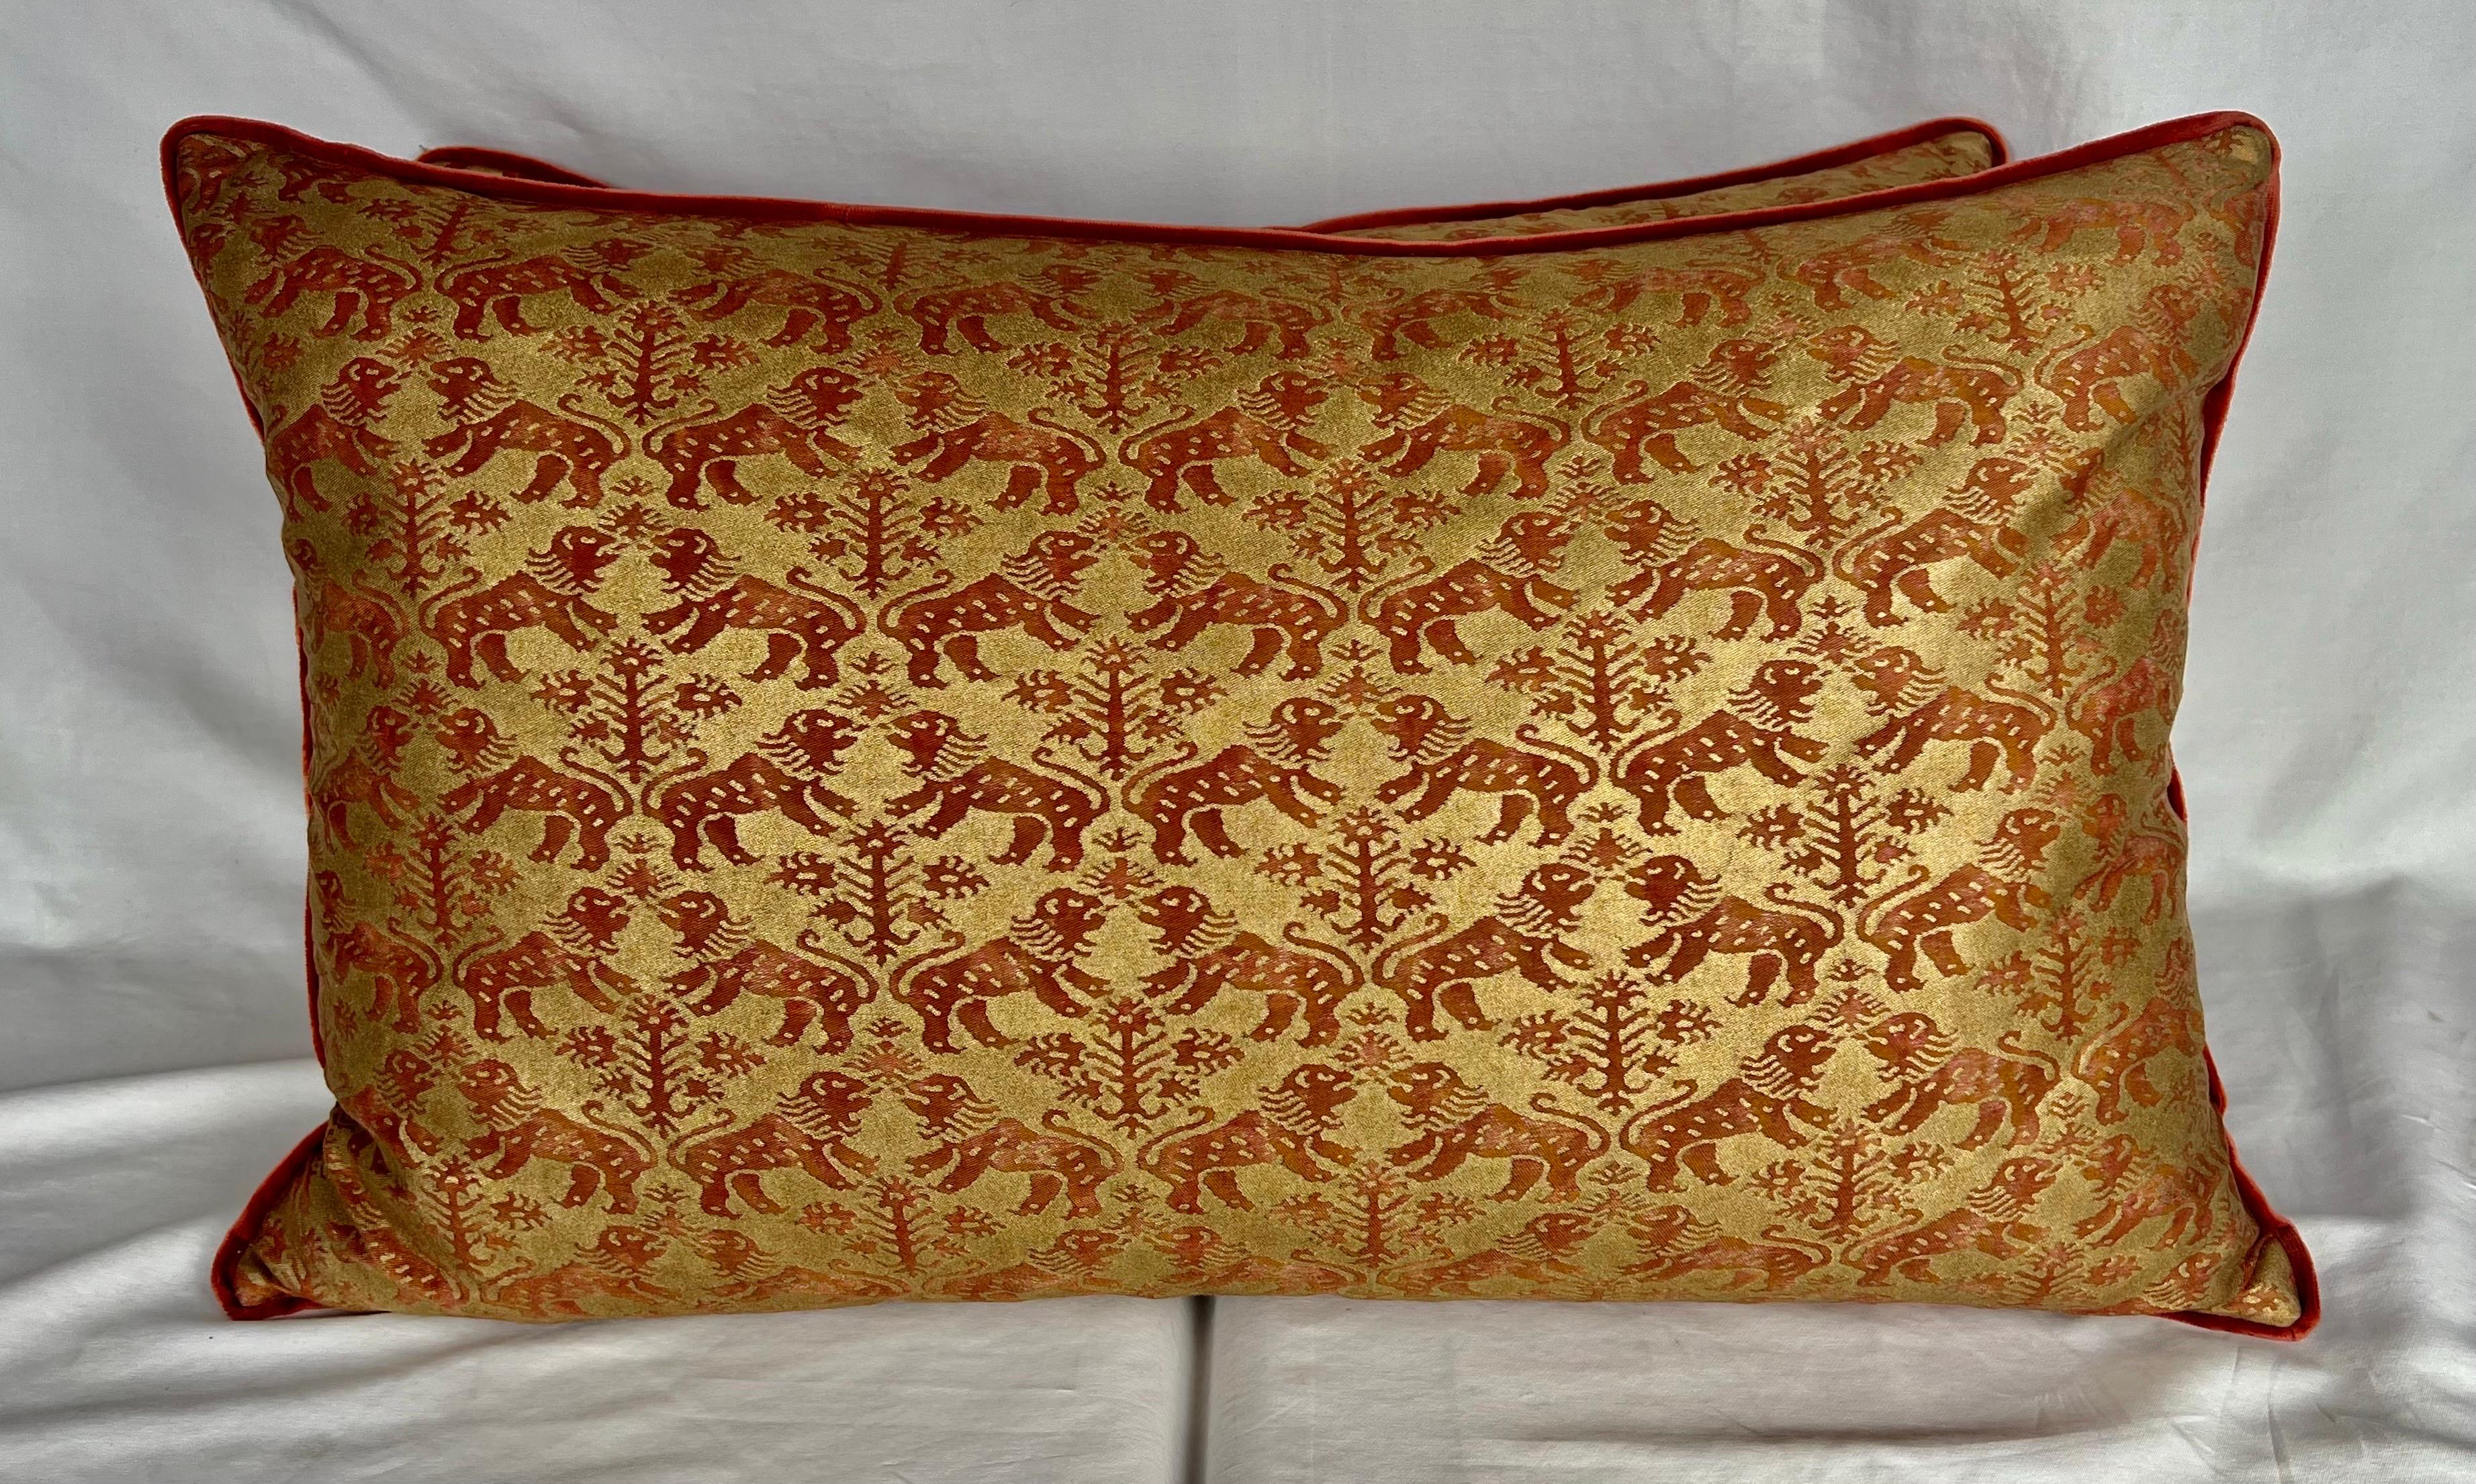 Newly constructed using vintage unused rust and silvery gold patterned Fortuny textile. 